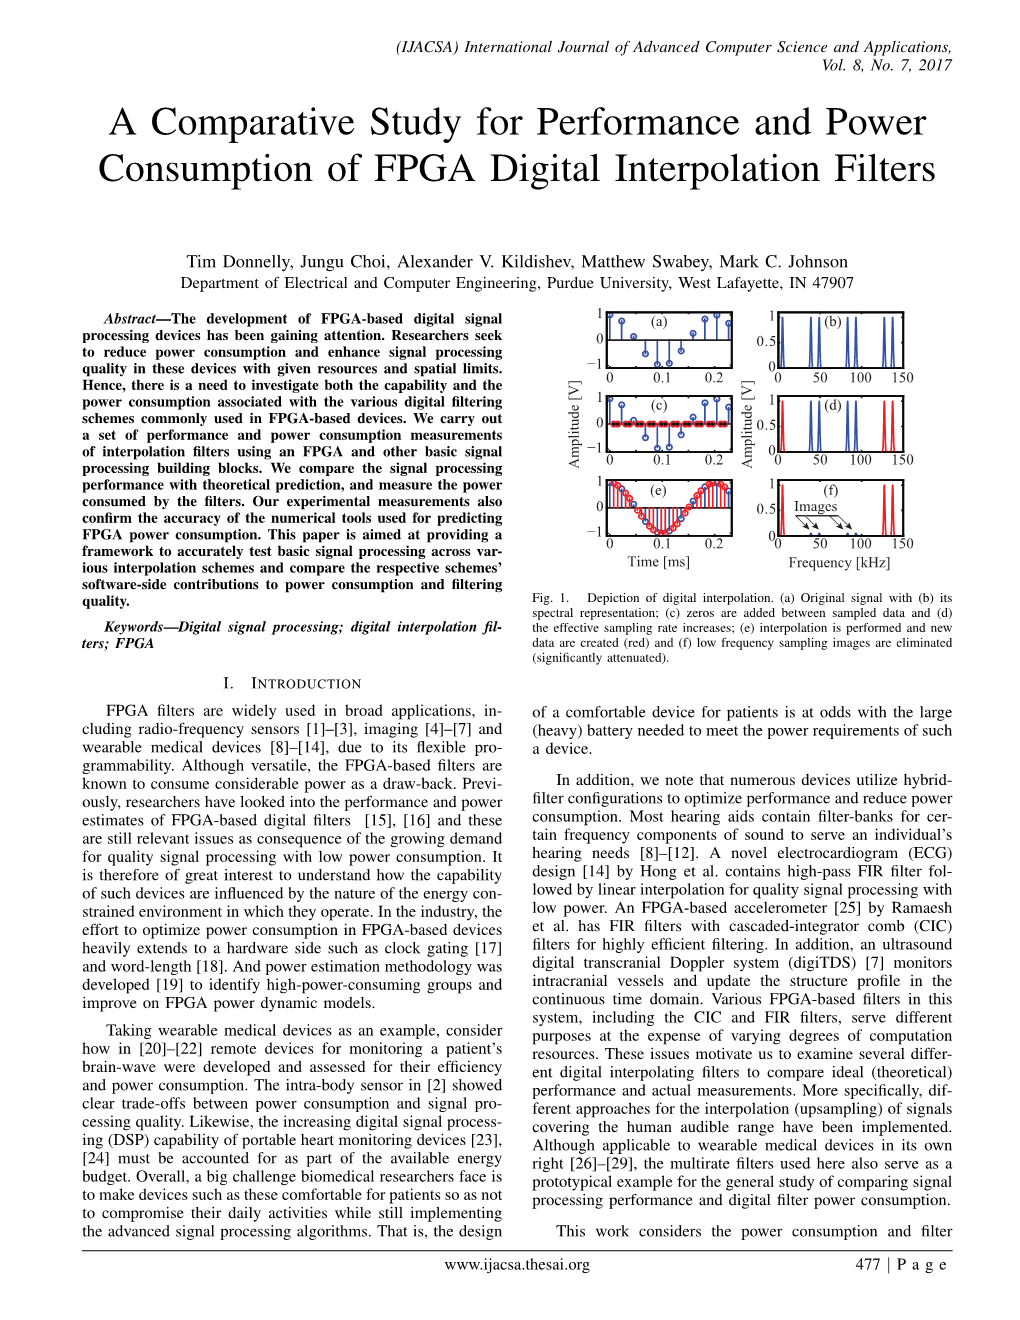 A Comparative Study for Performance and Power Consumption of FPGA Digital Interpolation Filters